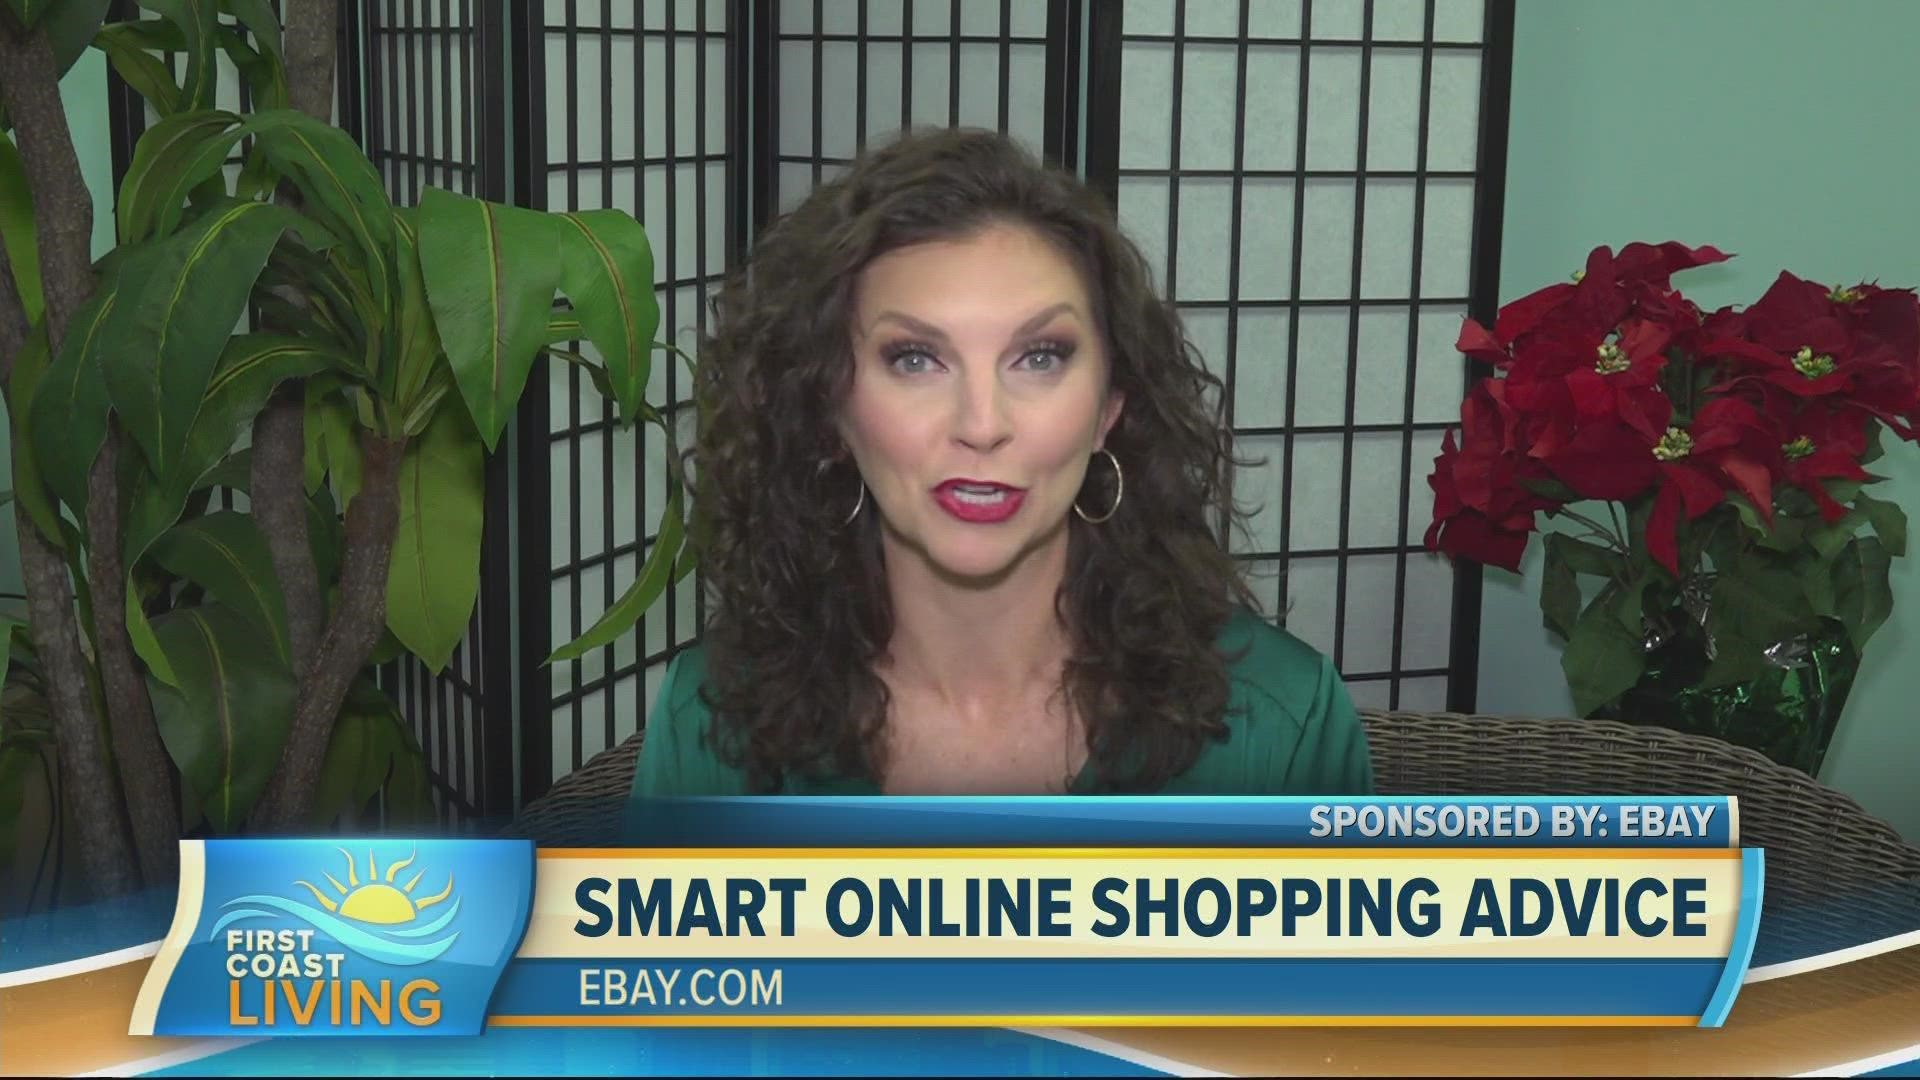 VP of Buyer Experience eBay NYC, Bradford Shellhammer discusses ways to avoid holiday shipping delays and offers advice on smart and safe online shopping.